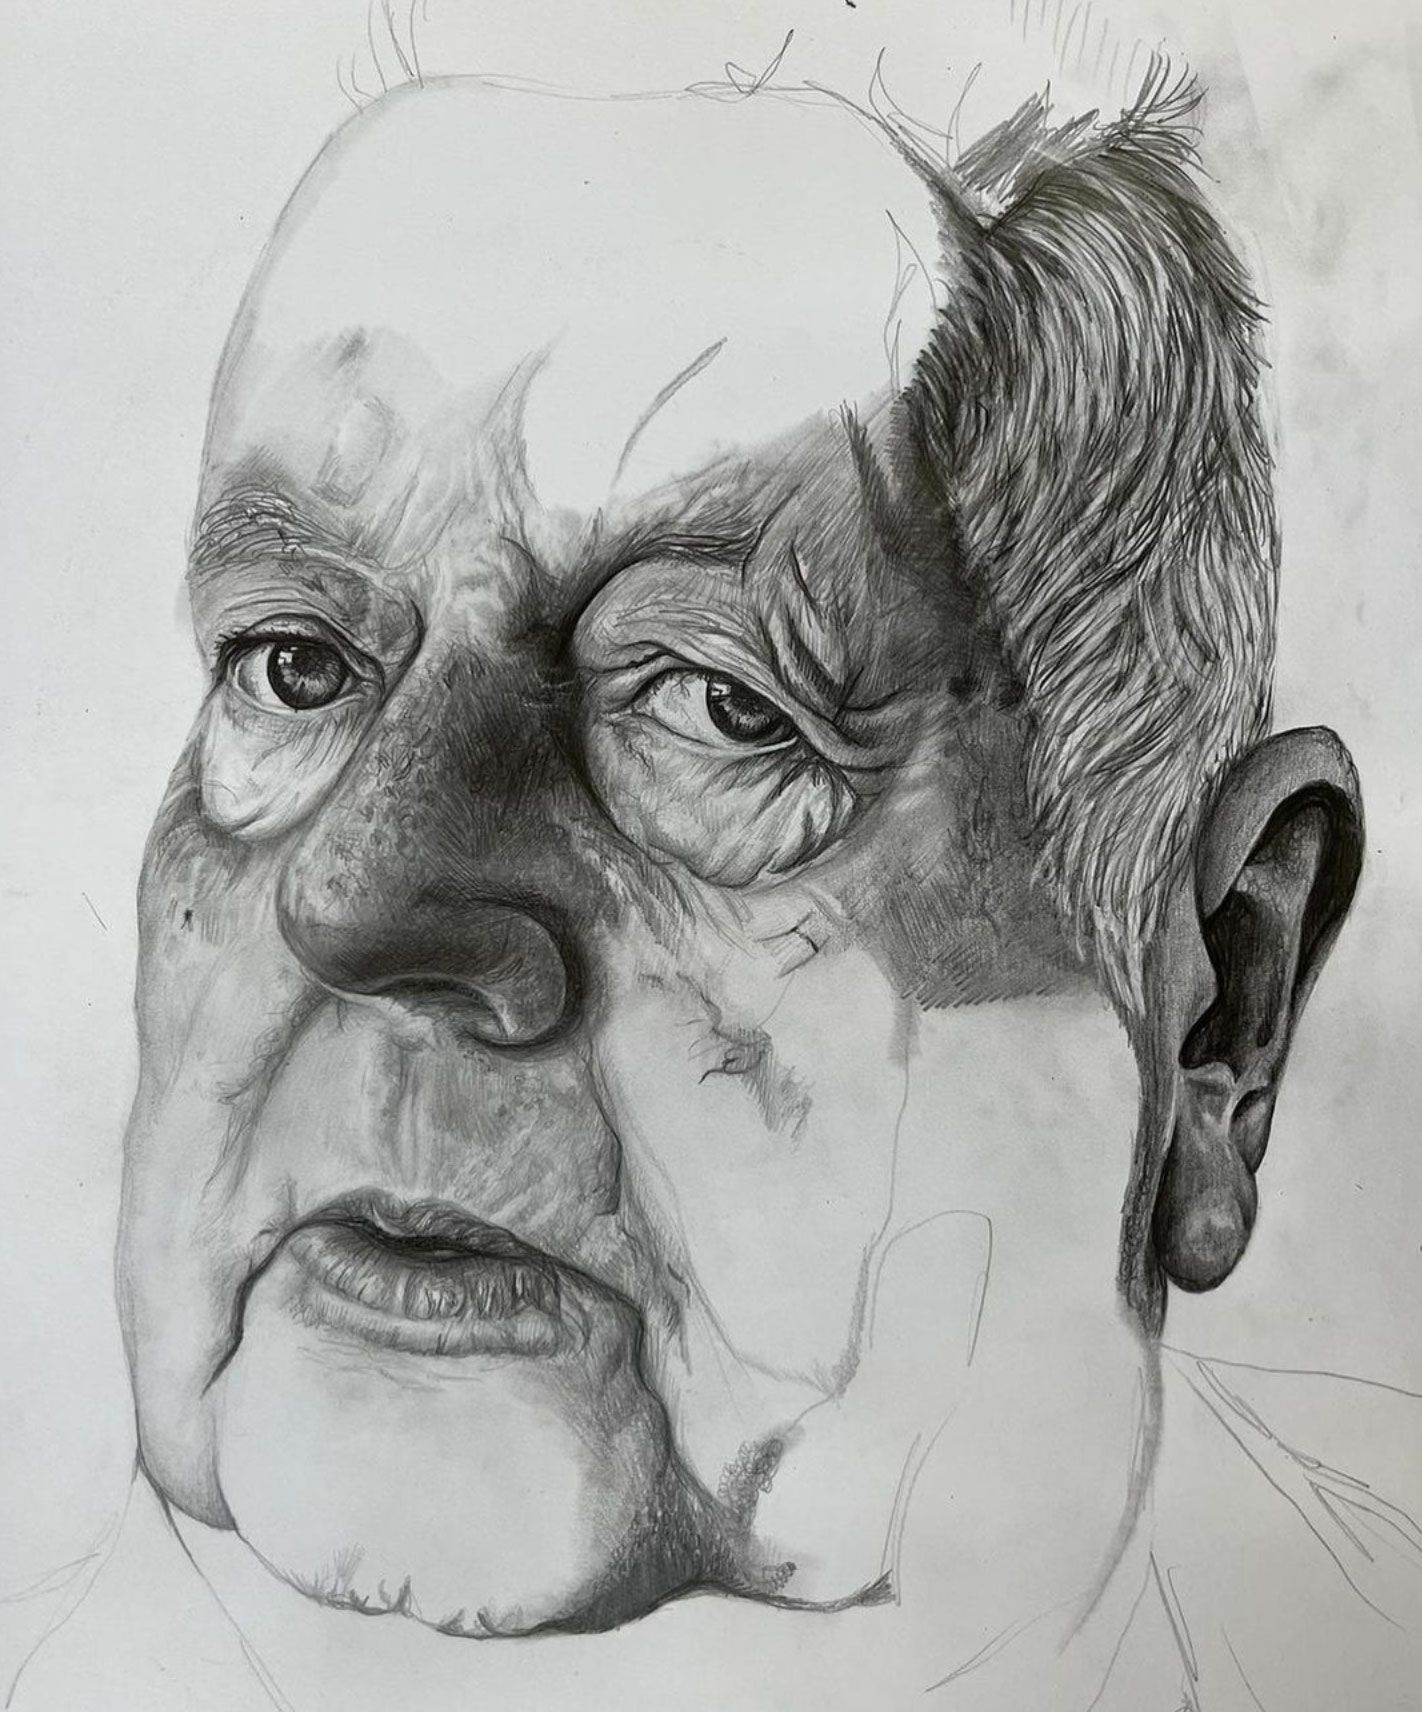 An unfinished drawing of a man's face.